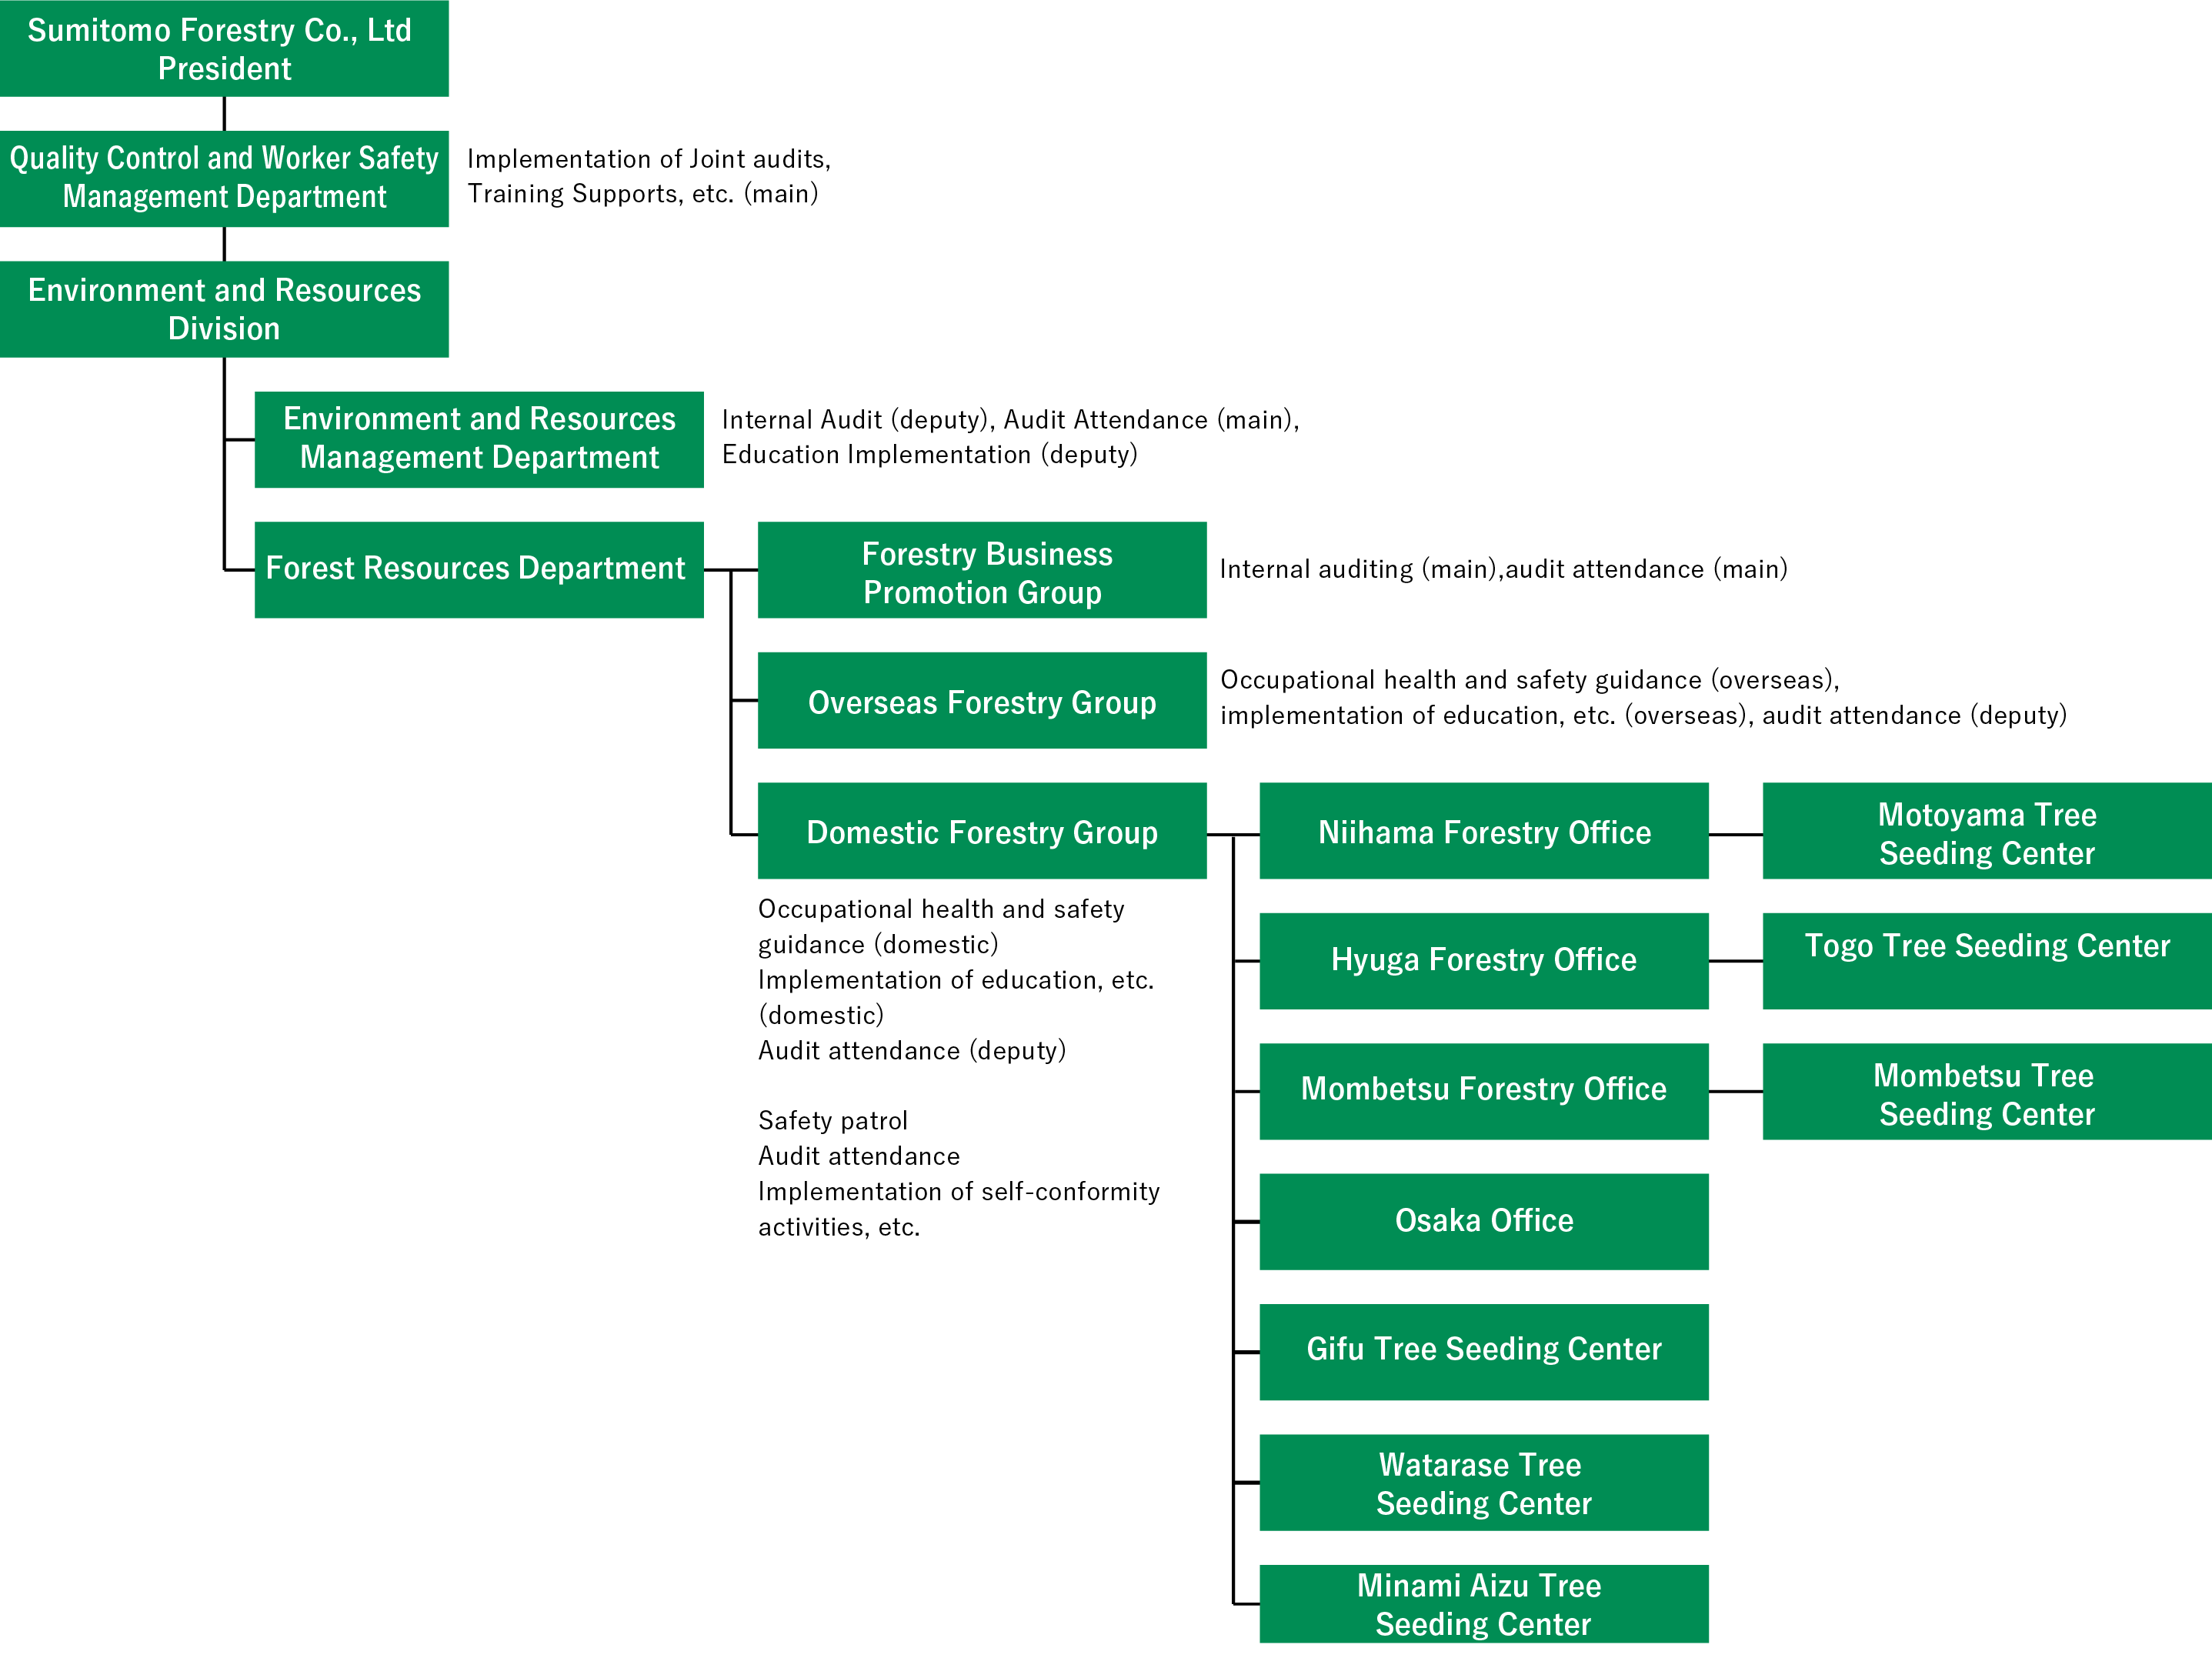 Occupational Health and Safety Management System Chart of Forest Department